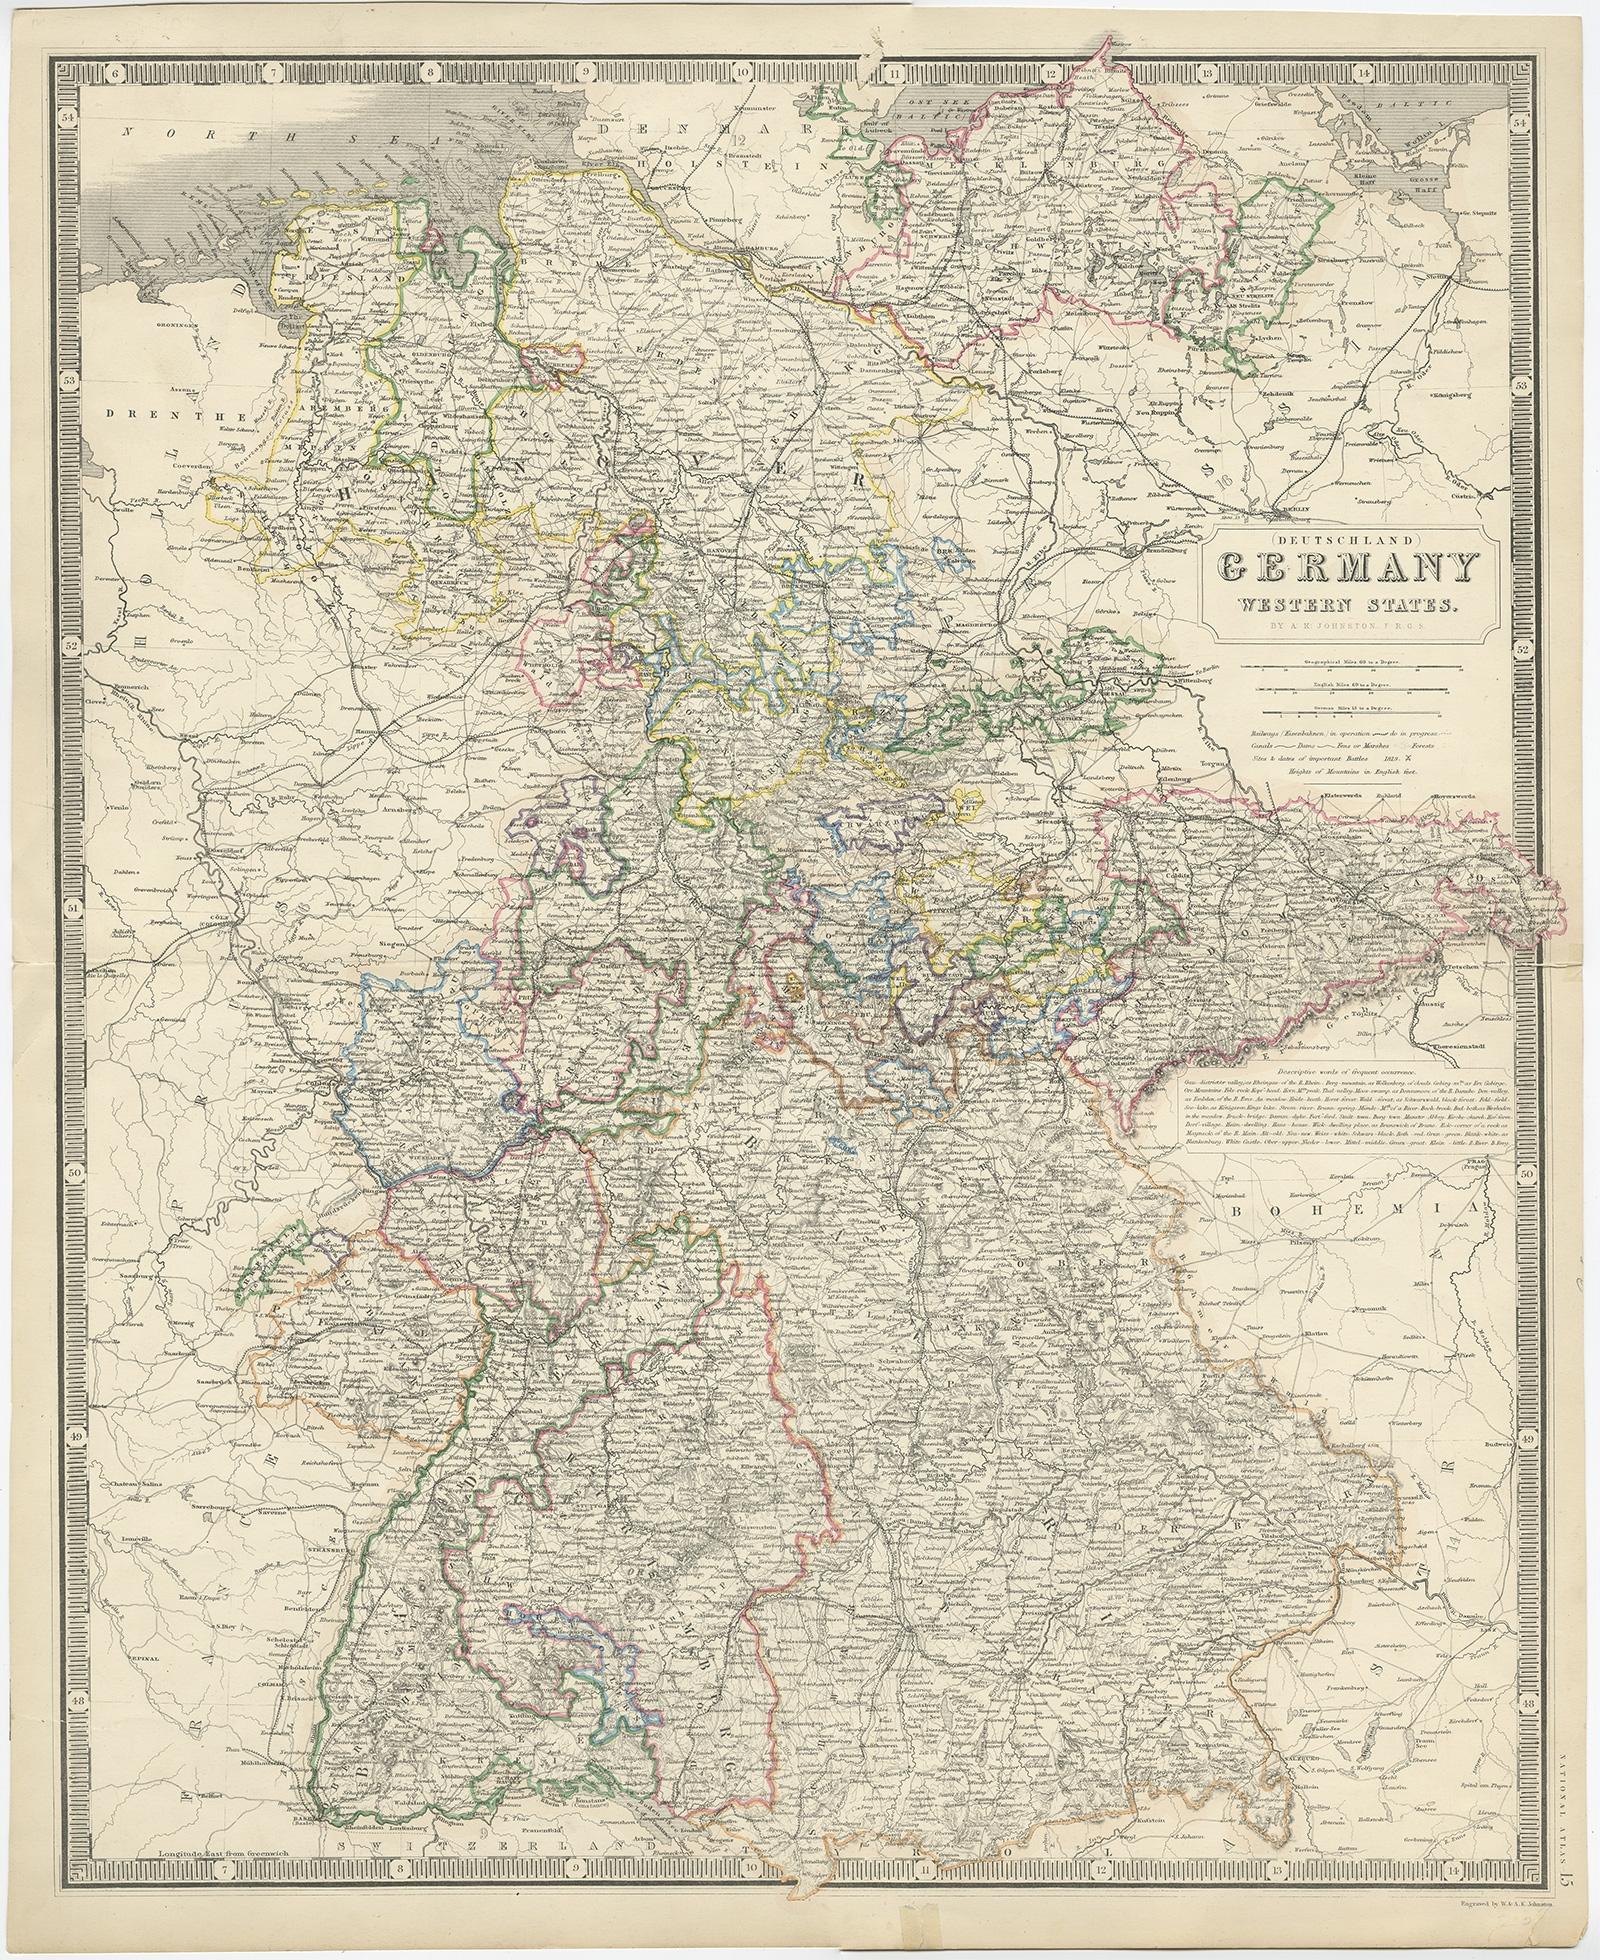 Antique map titled '(Deutschland) Germany, Western States'. 

Map of West Germany depicting many regions including Wurtemberg, Bavaria, Hanover and others. This map originates from 'National Atlas of General Geography (...).', by W.& A.K.